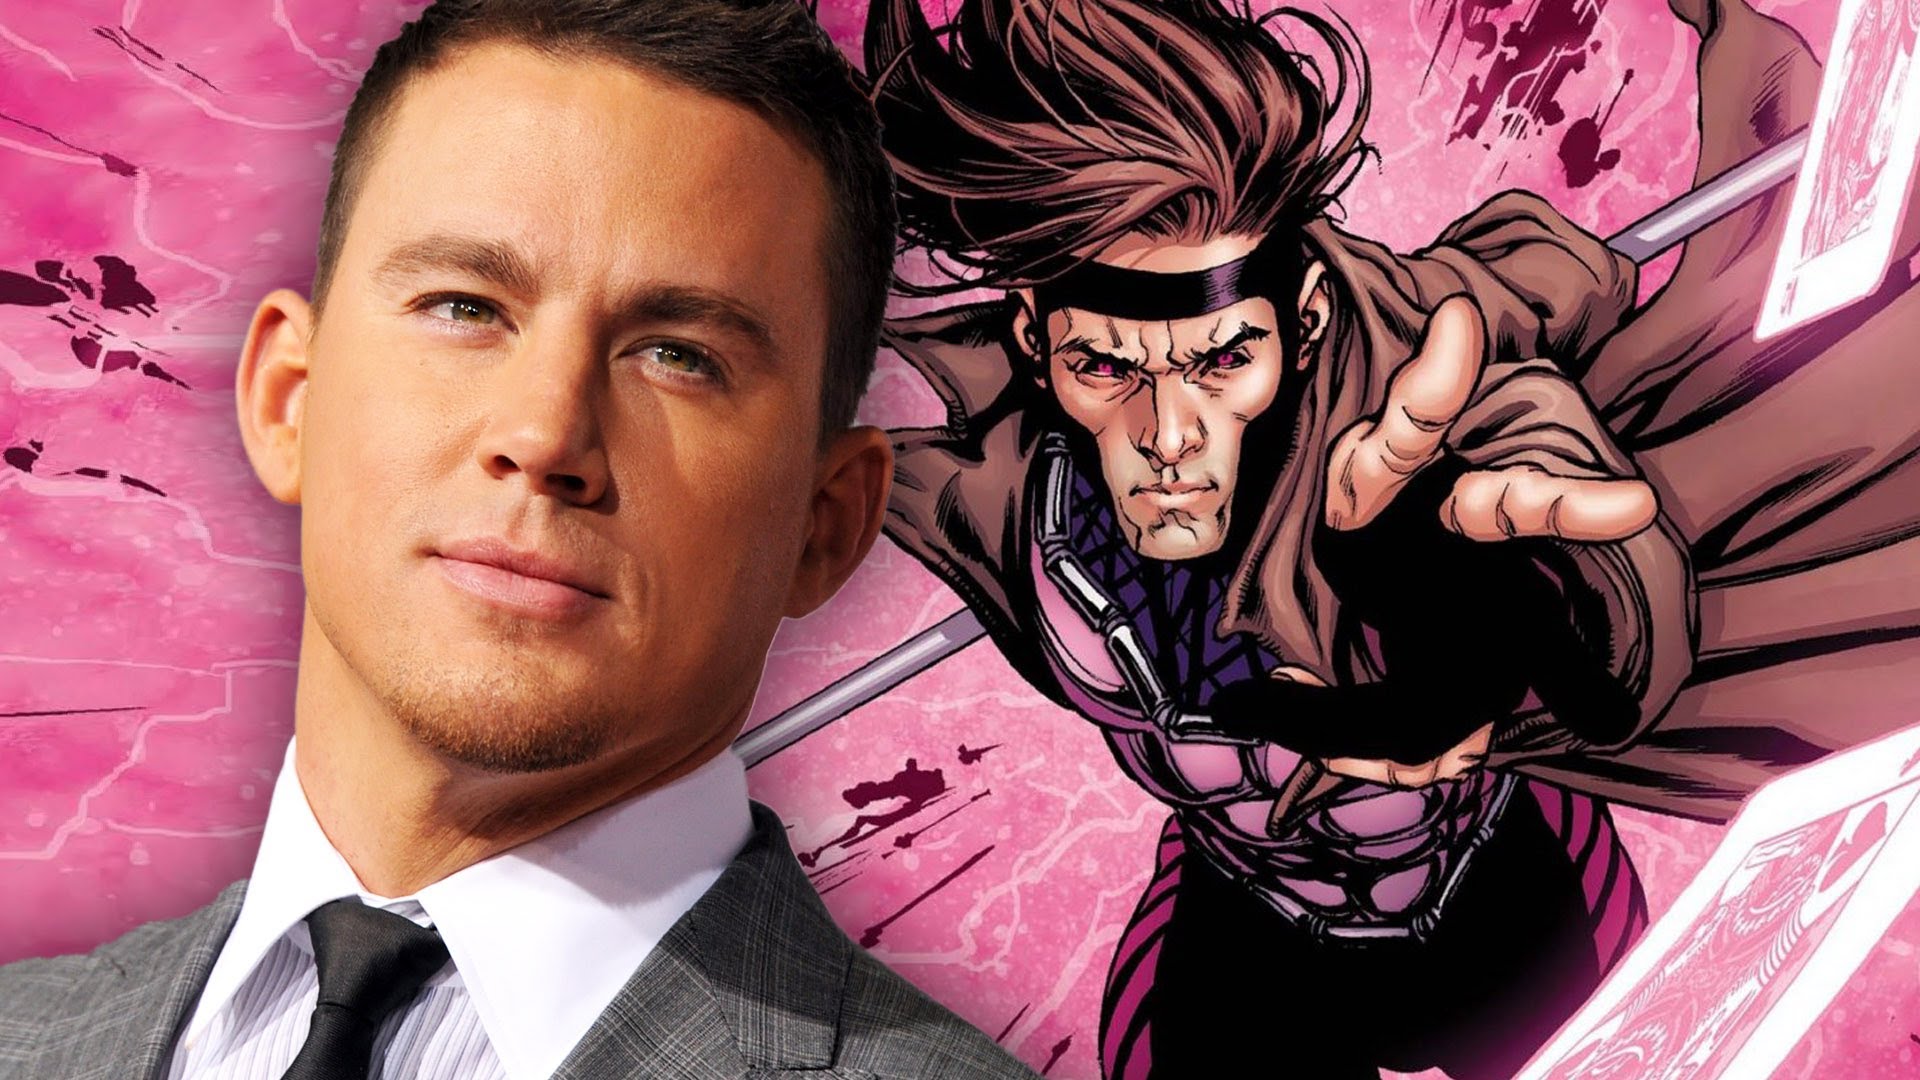 channing-tatum-confirmed-for-gambit